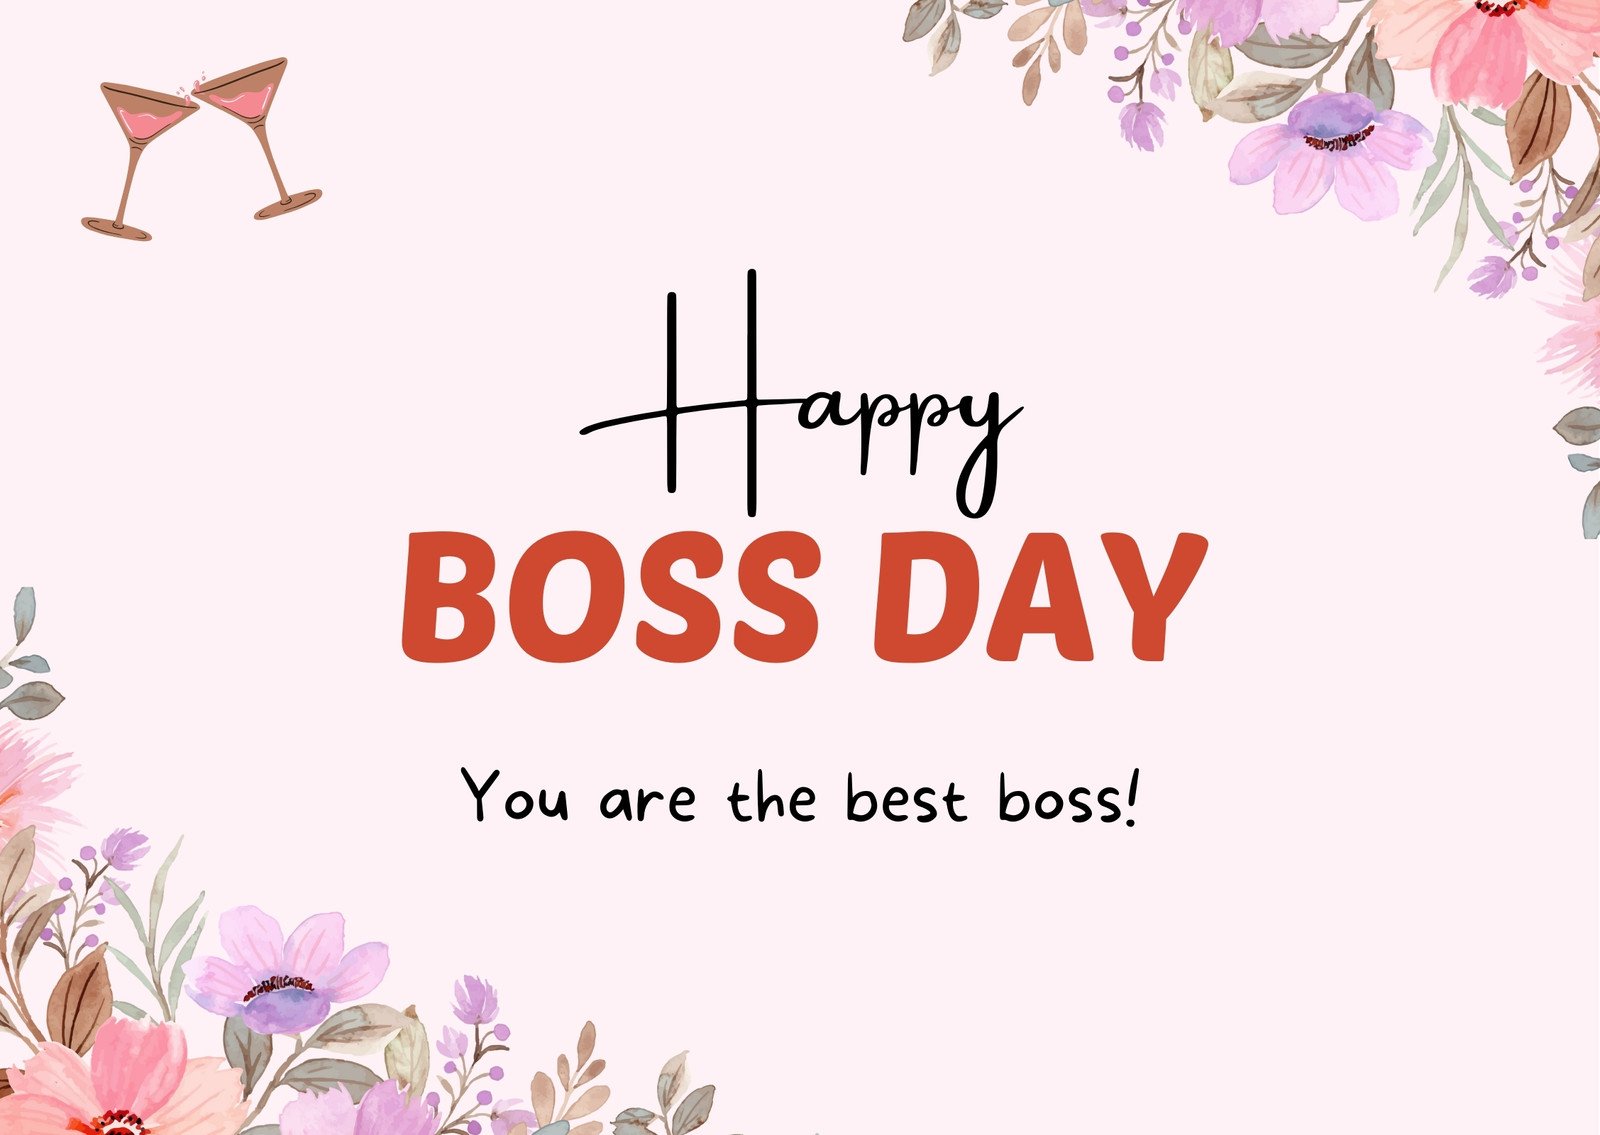 Page 2 - Free to customize and print Boss Day card templates | Canva